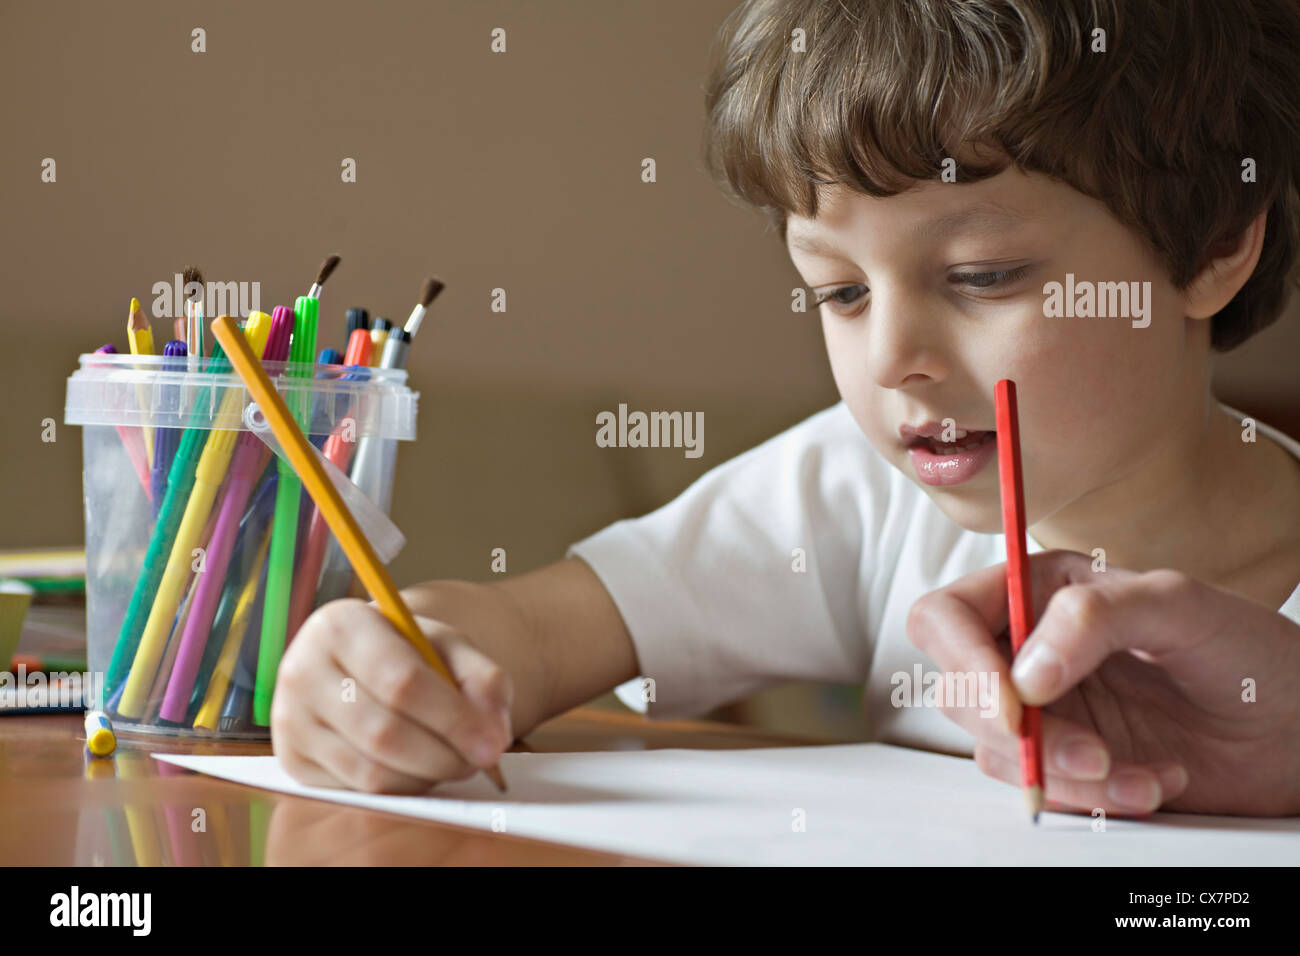 A boy and a friend drawing with colored pencils, viewpoint of boy Stock Photo